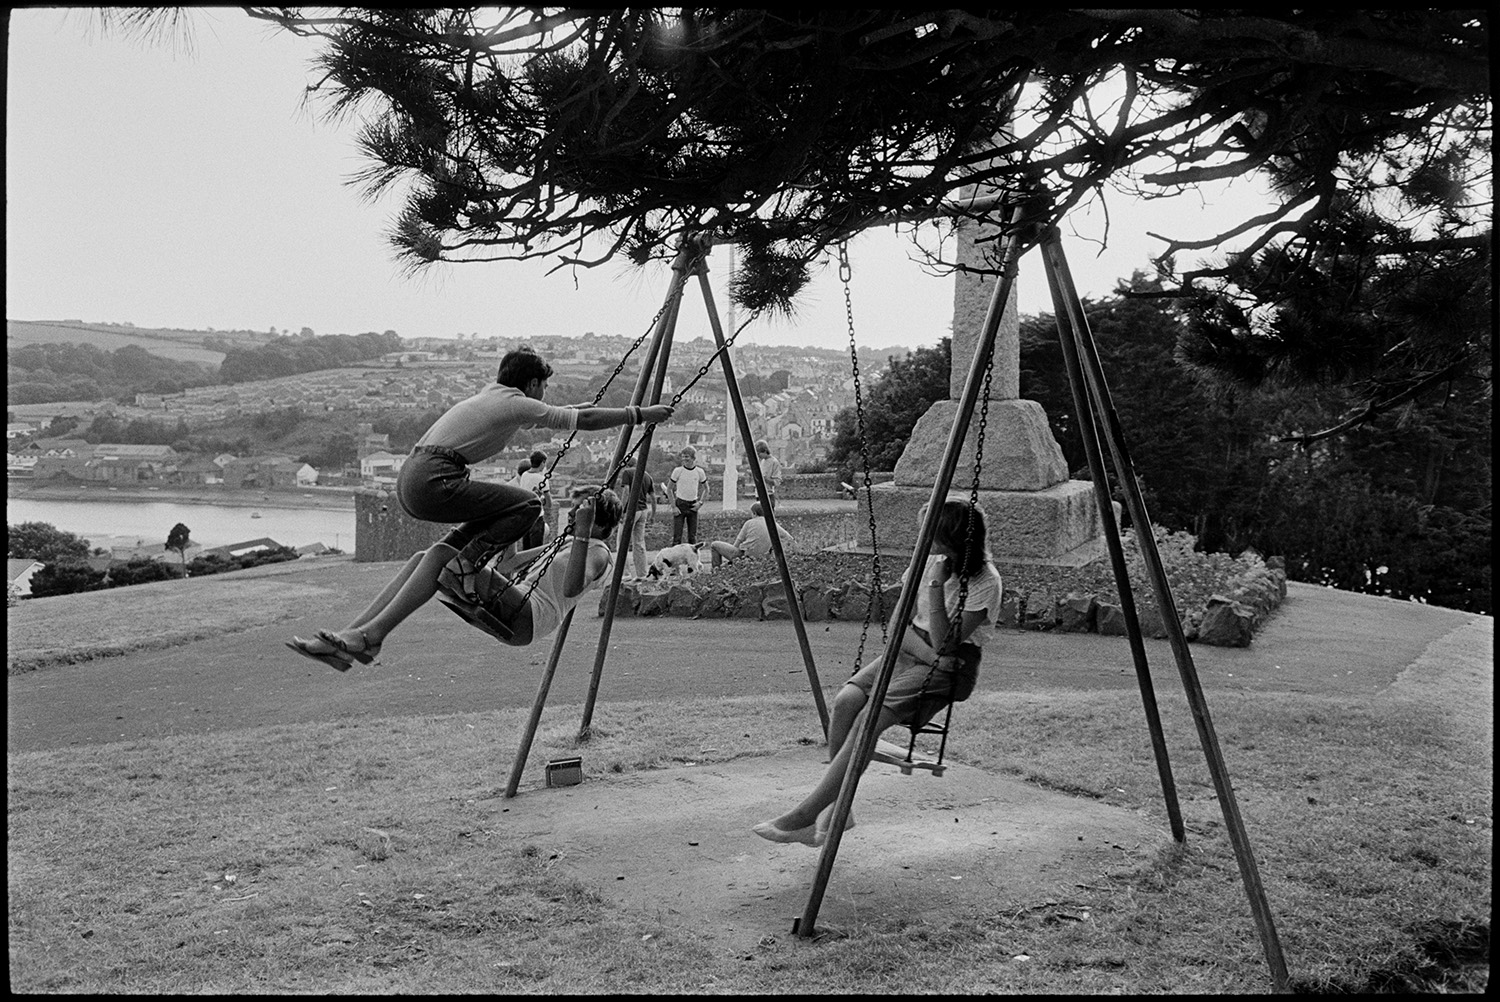 Youths playing football, swings in park, with dog. 
[Young men and women on swings at Chudleigh Fort by the war memorial. The town of Bideford and the River Torridge can be seen in the background.]